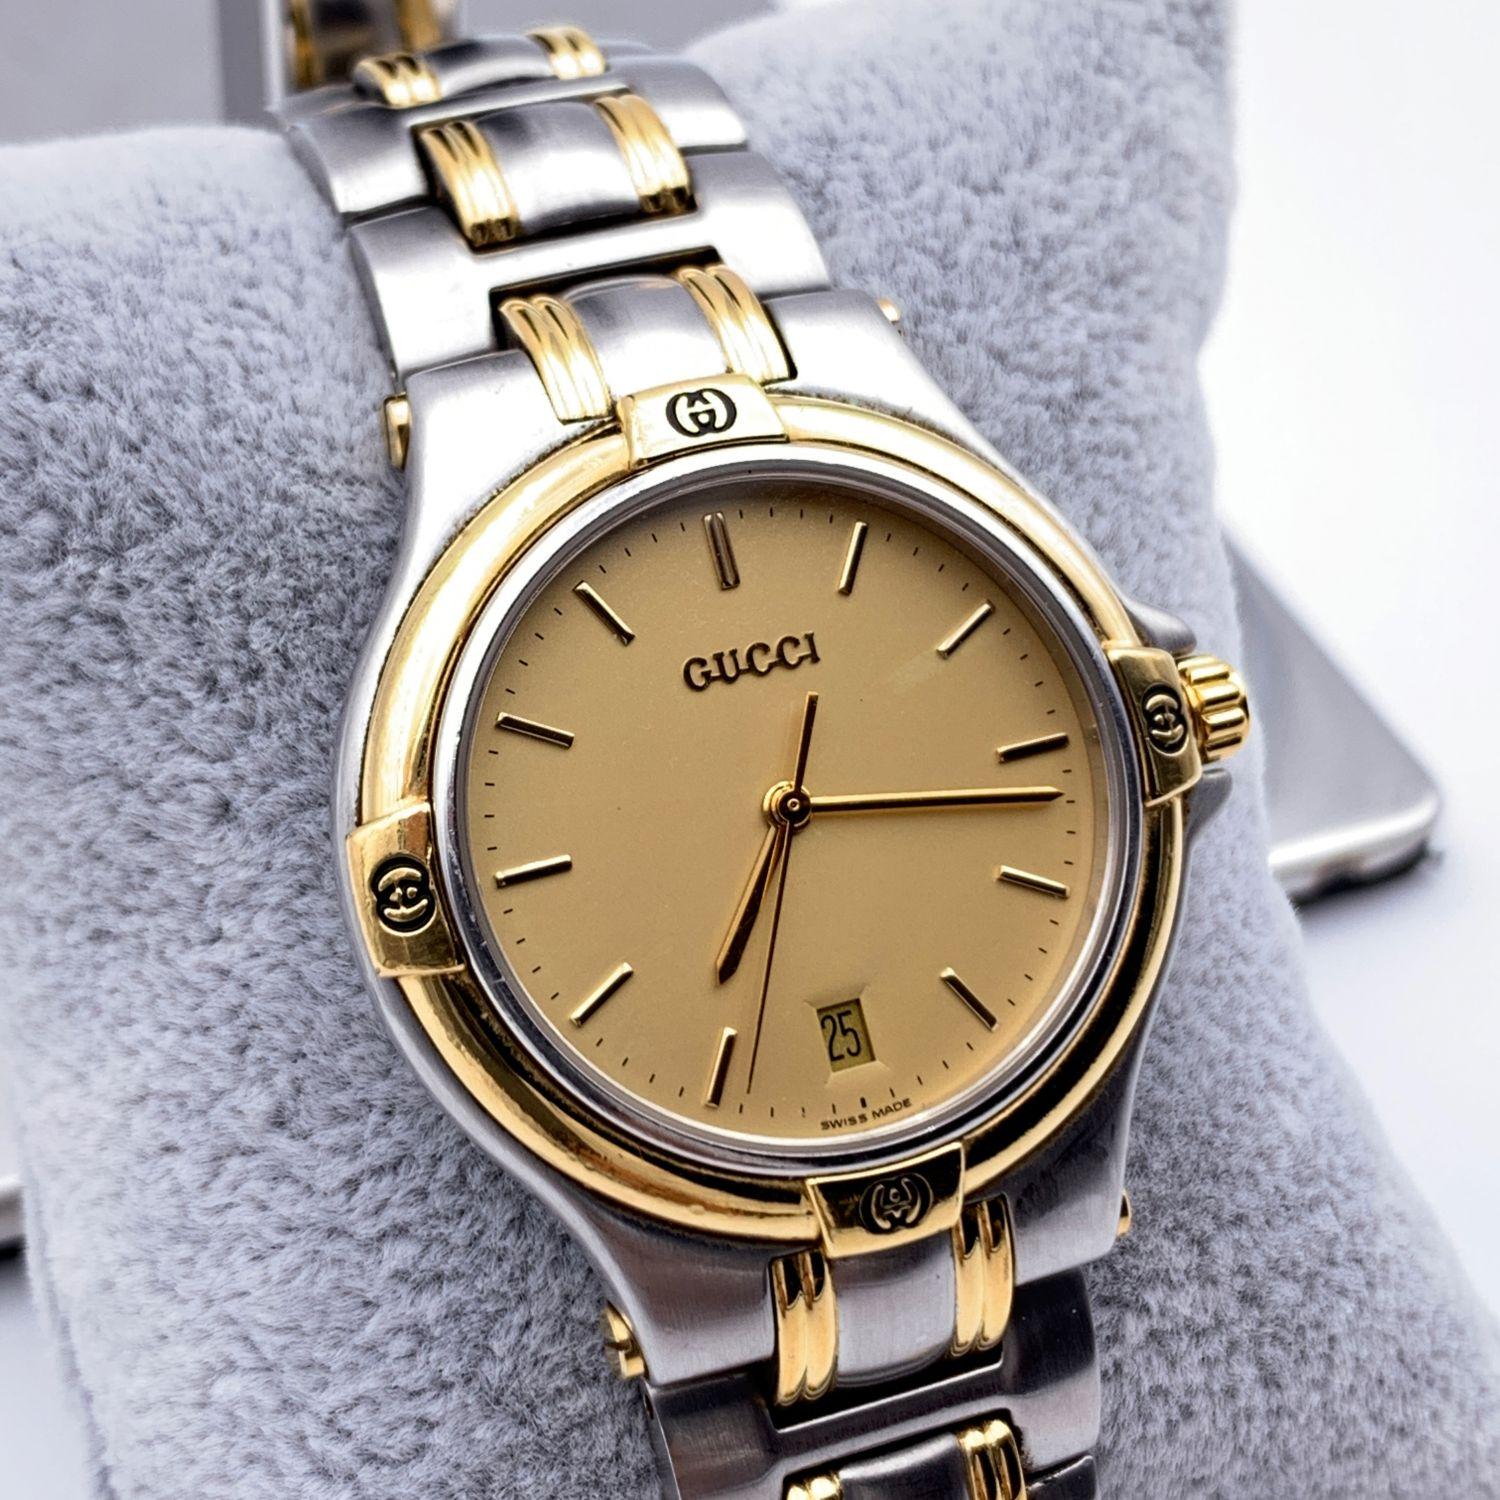 Gucci stainless steel wrist watch, mod. 9040 M. Stainless steel case with gold metal accents. Gold Dial. Date at 6 o'clock. Sapphire crystal. Swiss Made Quartz movement. Gucci written on face. Gucci crest on the reverse of the case. GG logo engraved